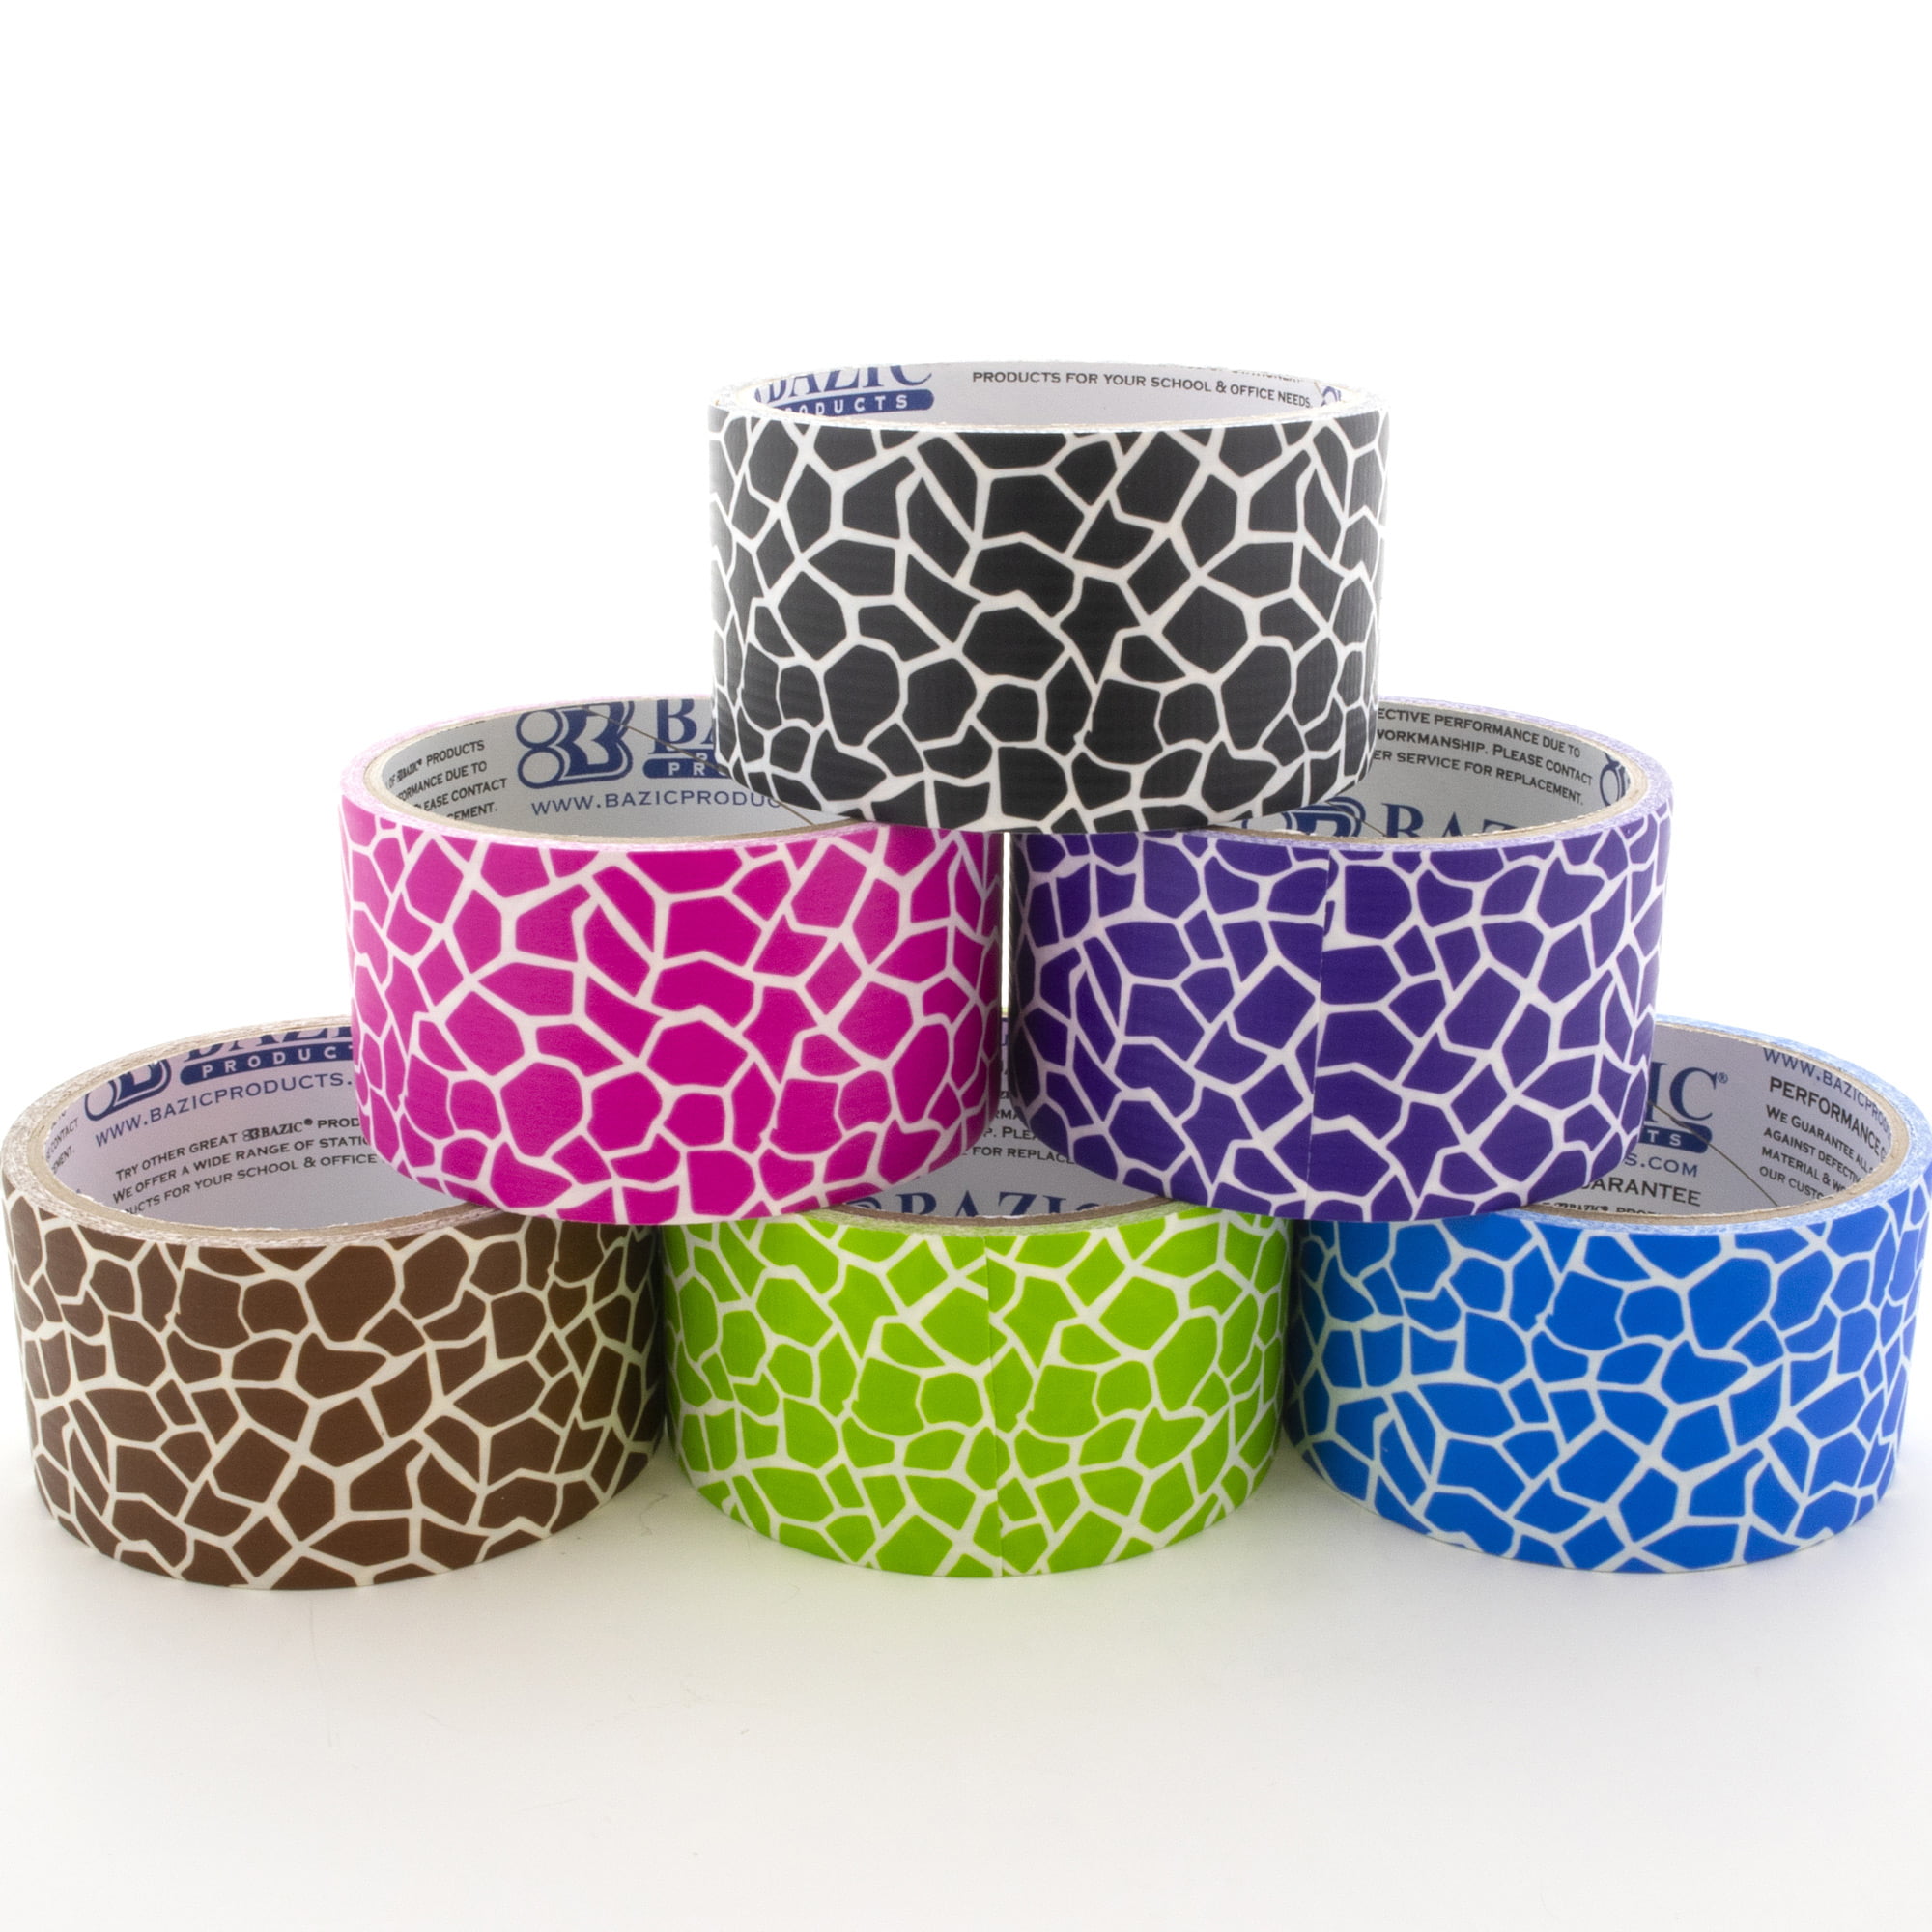 Decorative duct tape inventory: animal prints